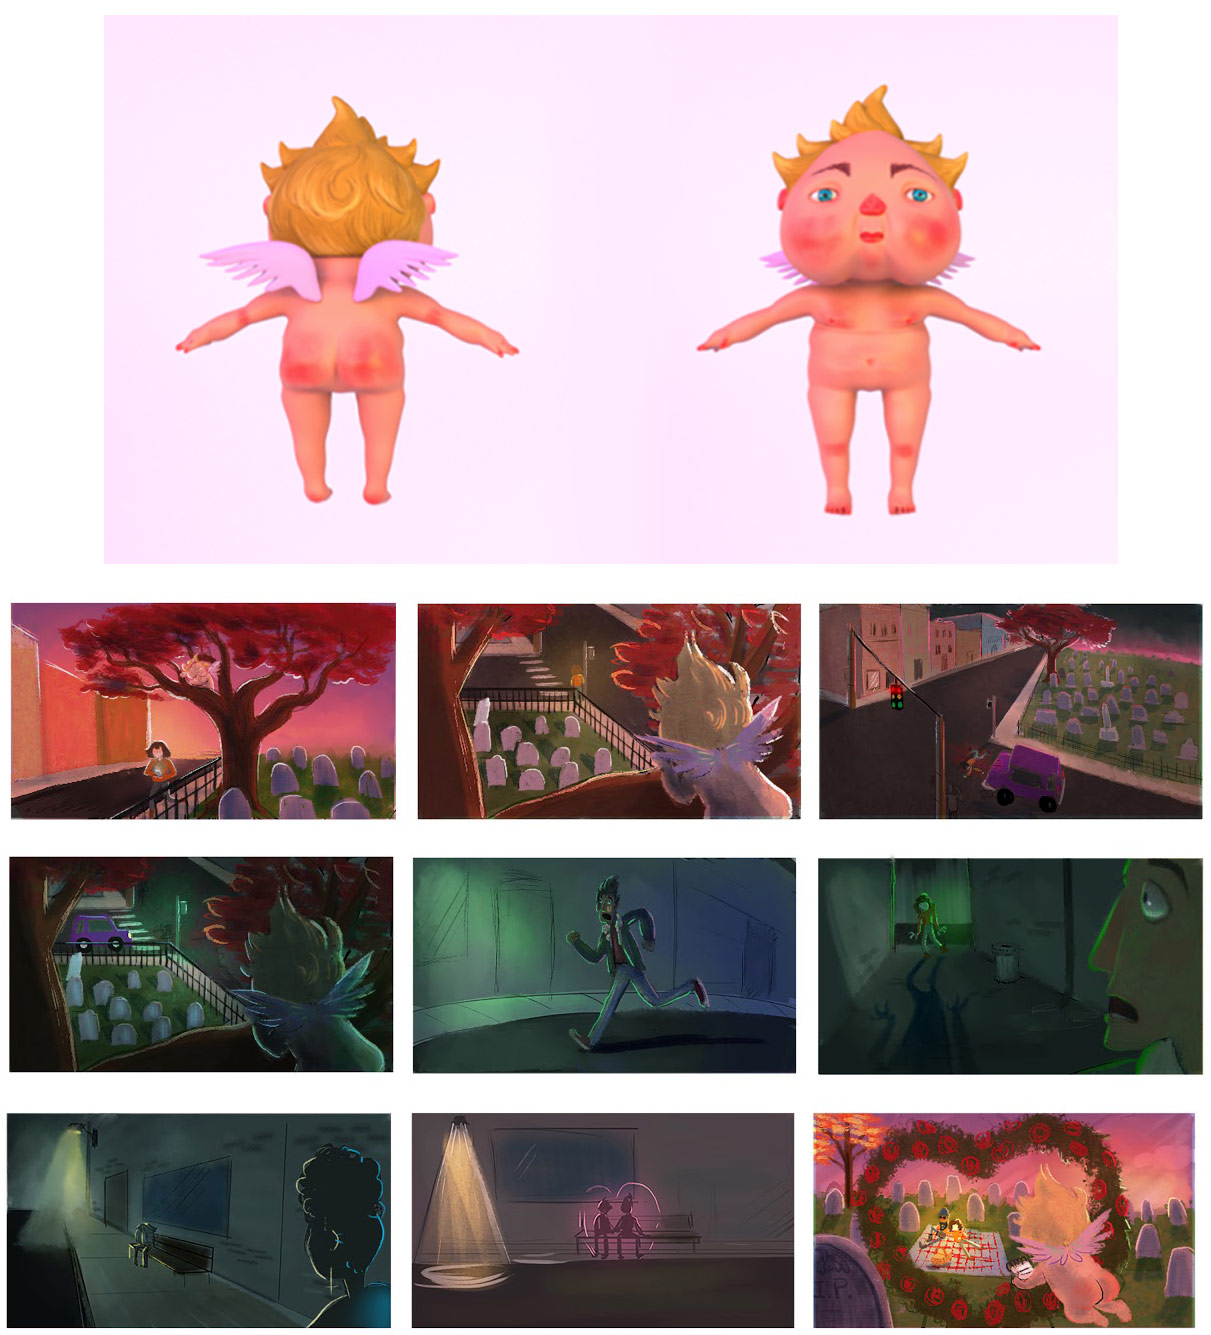 Concept art from Kaitlyn Fitzgerald's thesis project "Undying Love."